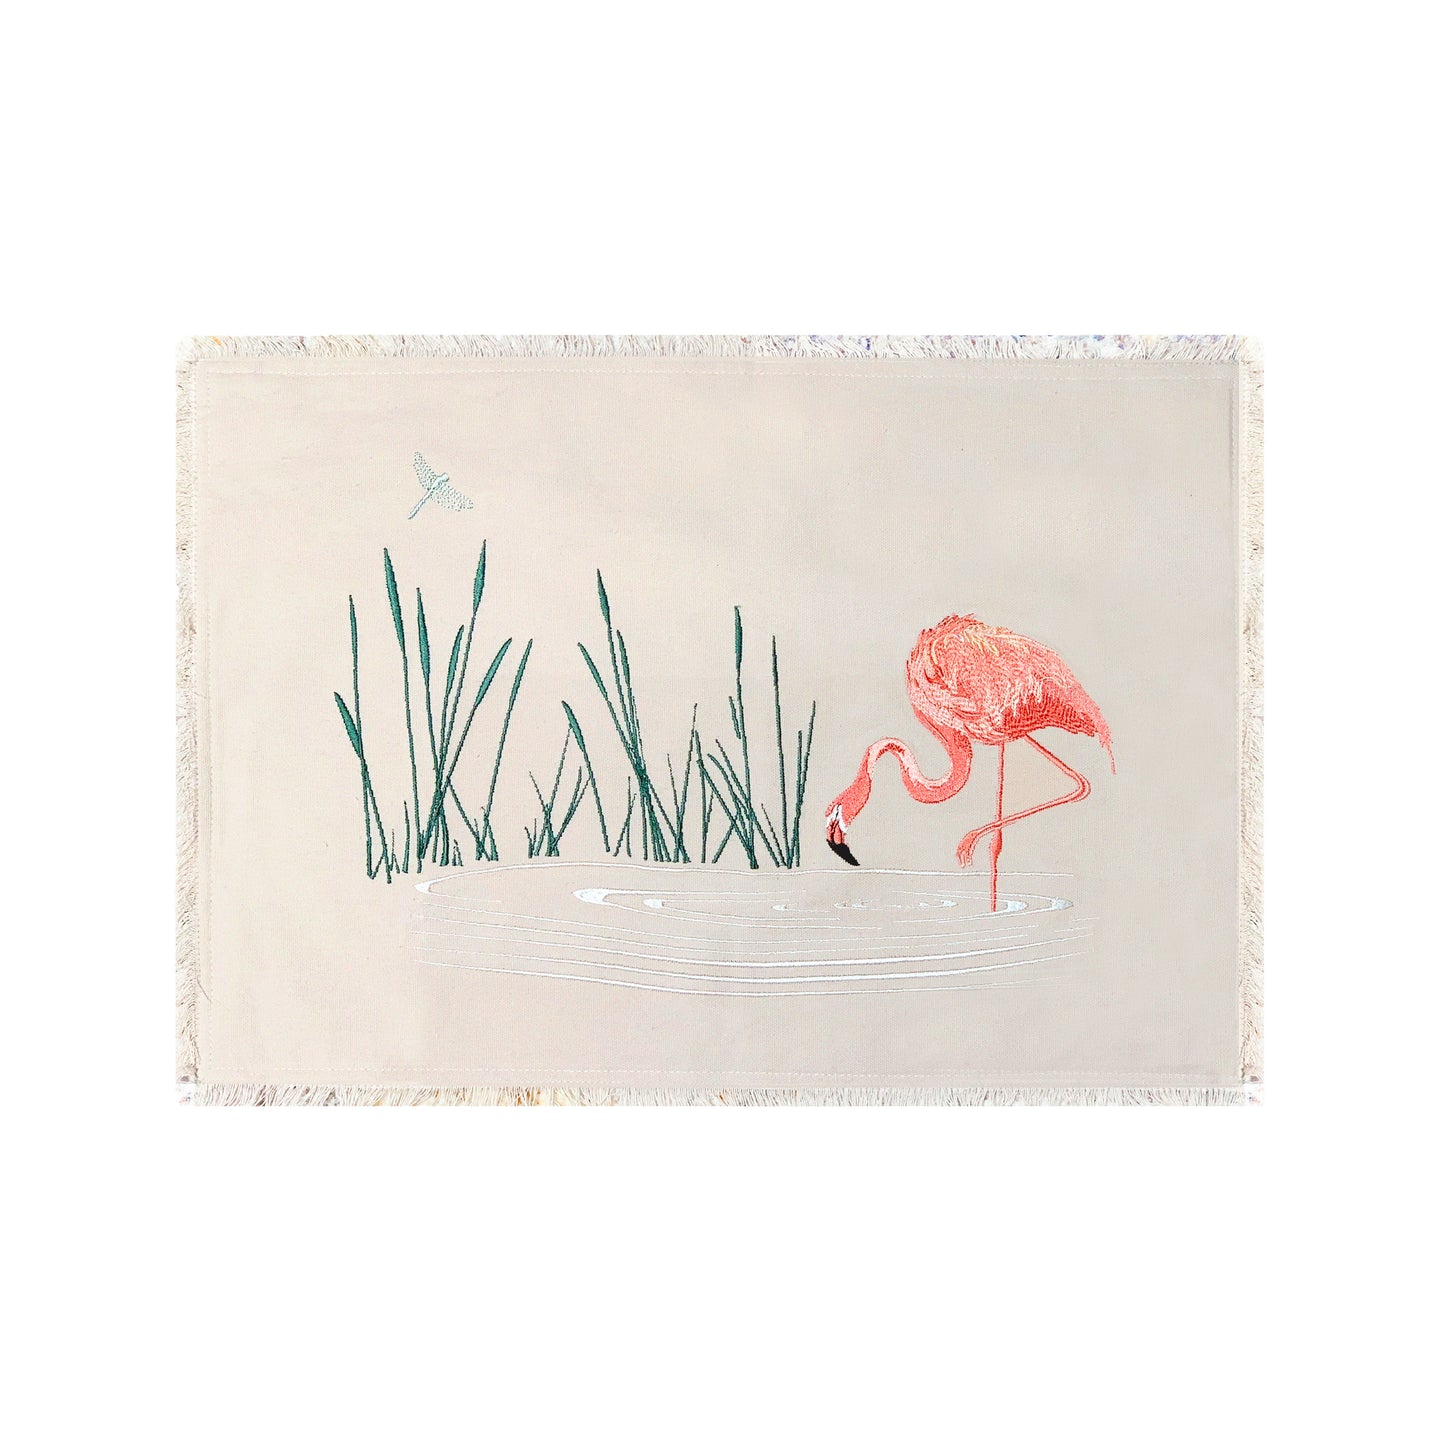 Placemat depicting embroidered Pink Flamingo and Reeds on a tan cotton background with fringe edges. 